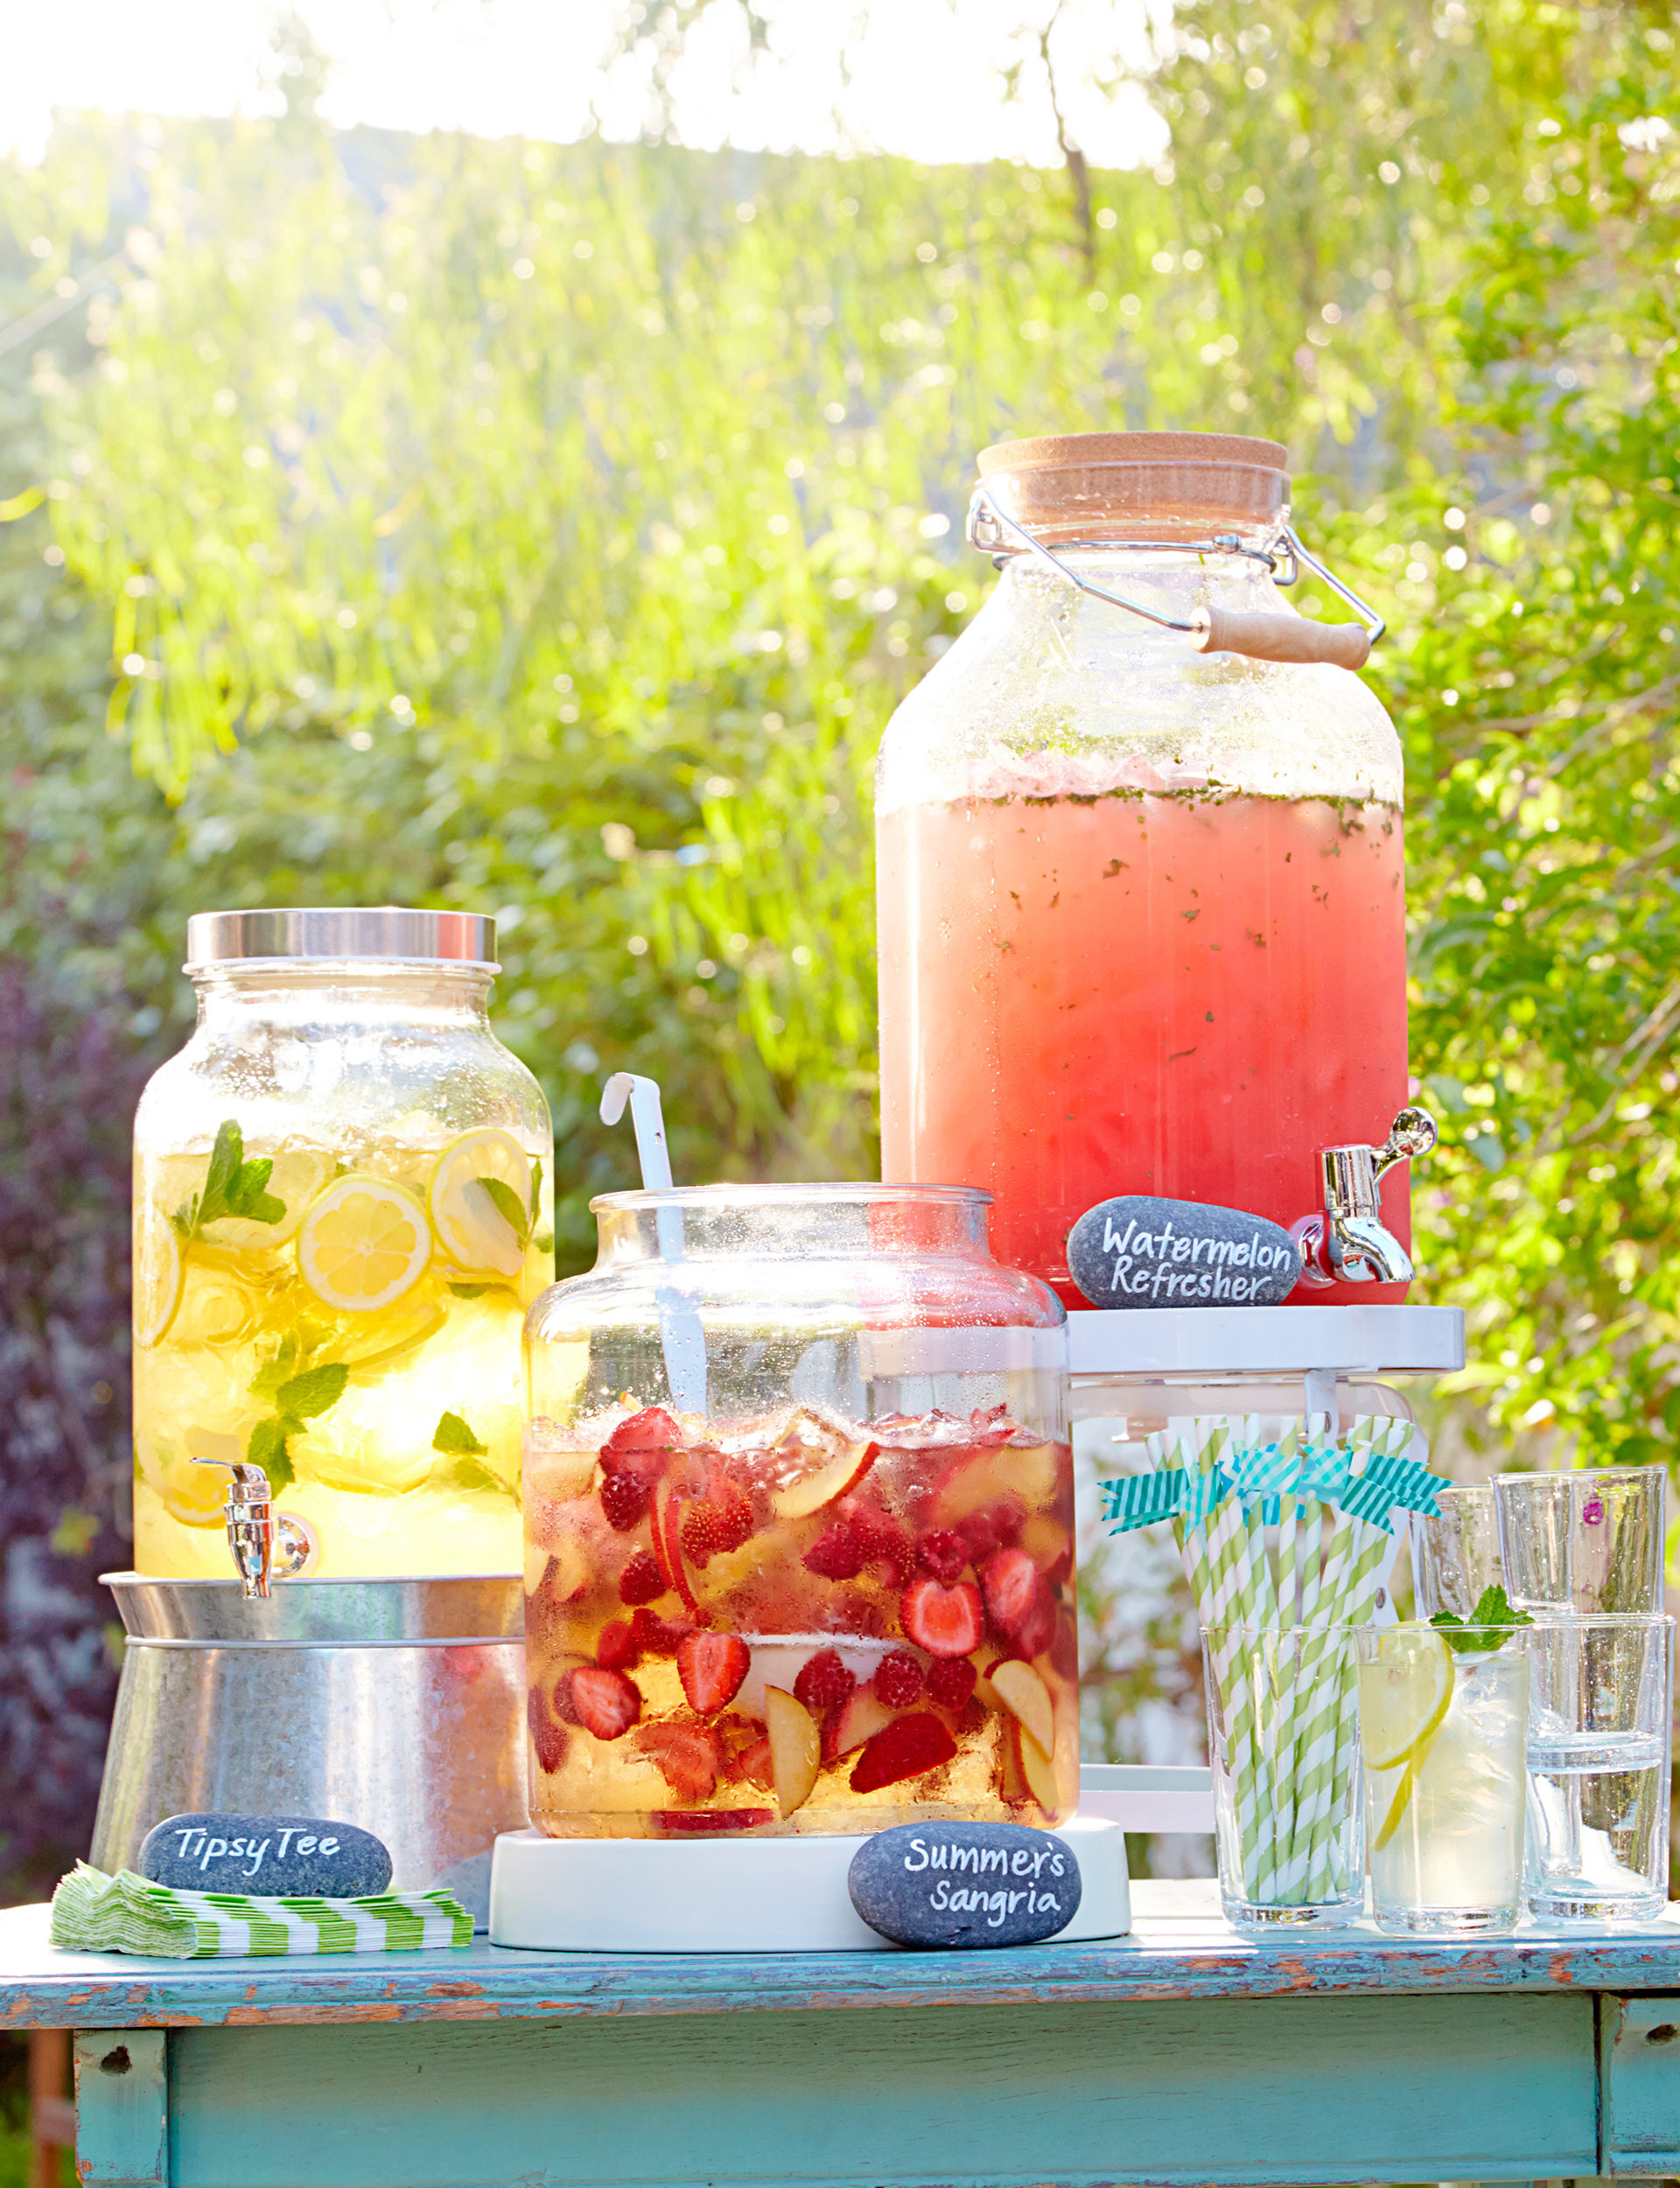 Summer Party Food Ideas For Adults
 Backyard Party Ideas And Decor Summer Entertaining Ideas